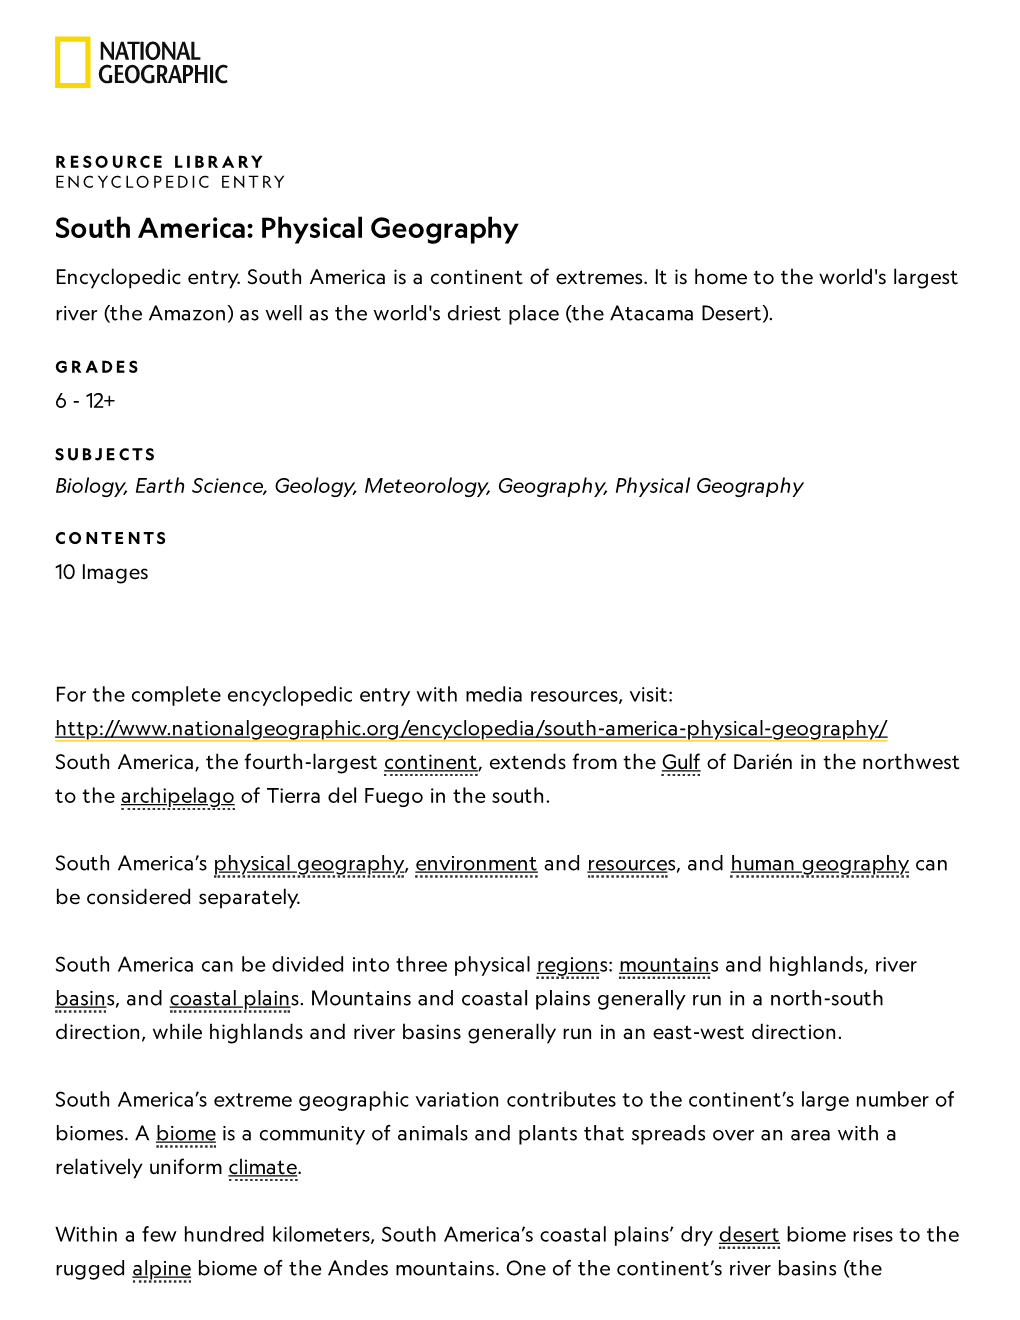 South America: Physical Geography